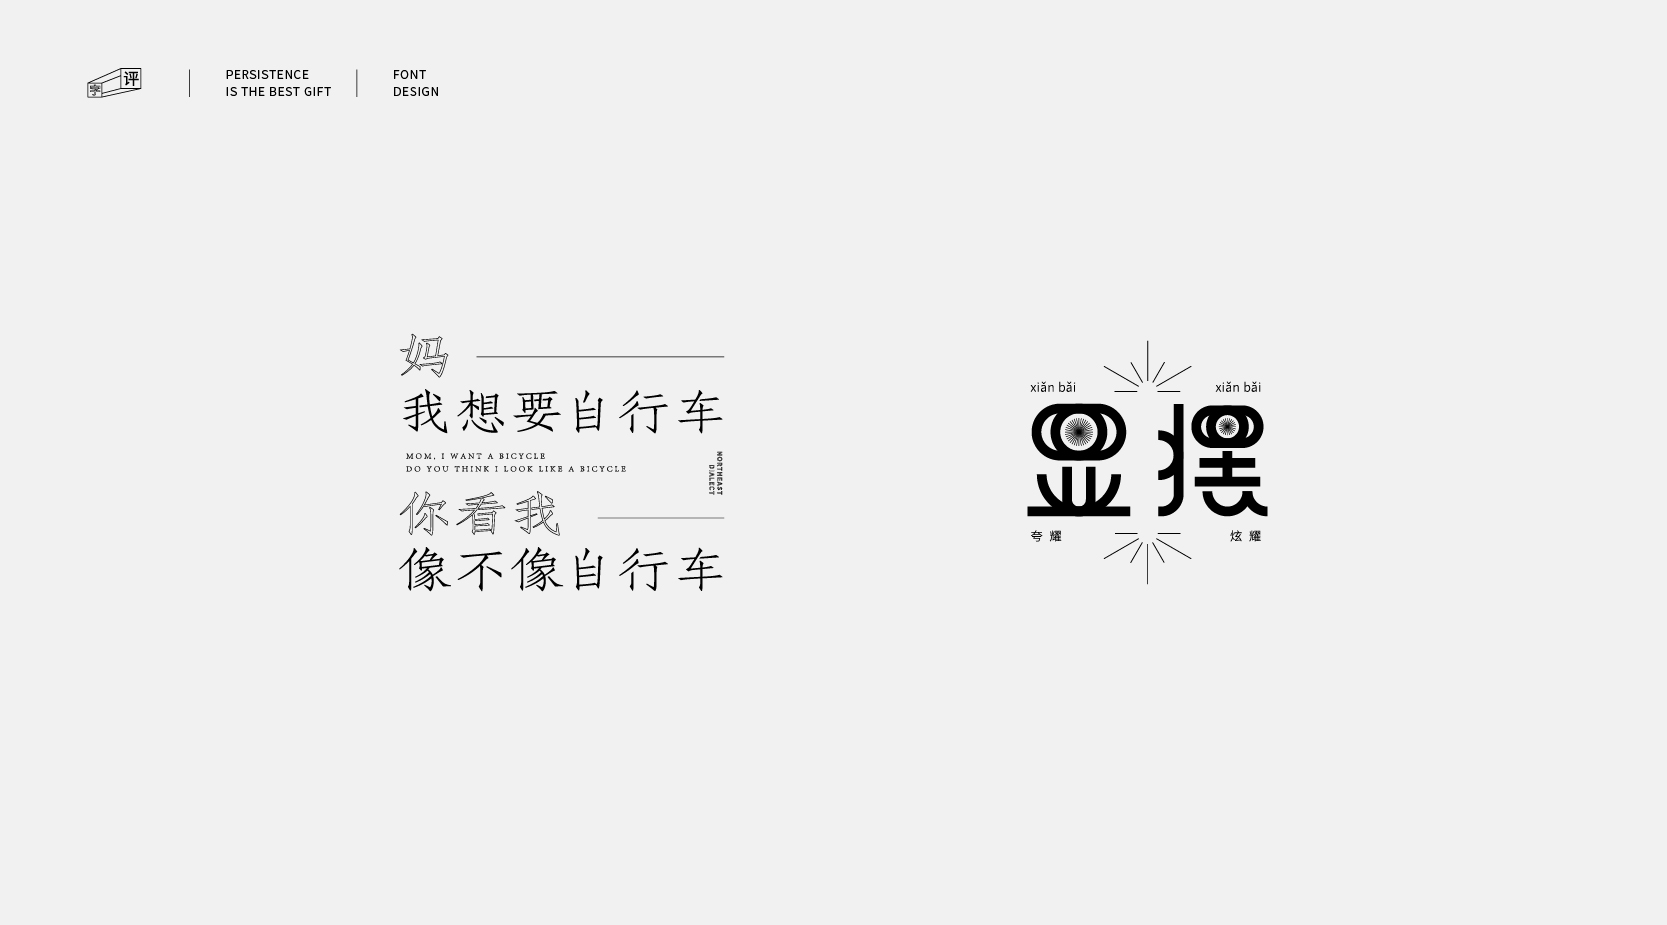 Five regional dialects, 200 sets of font design